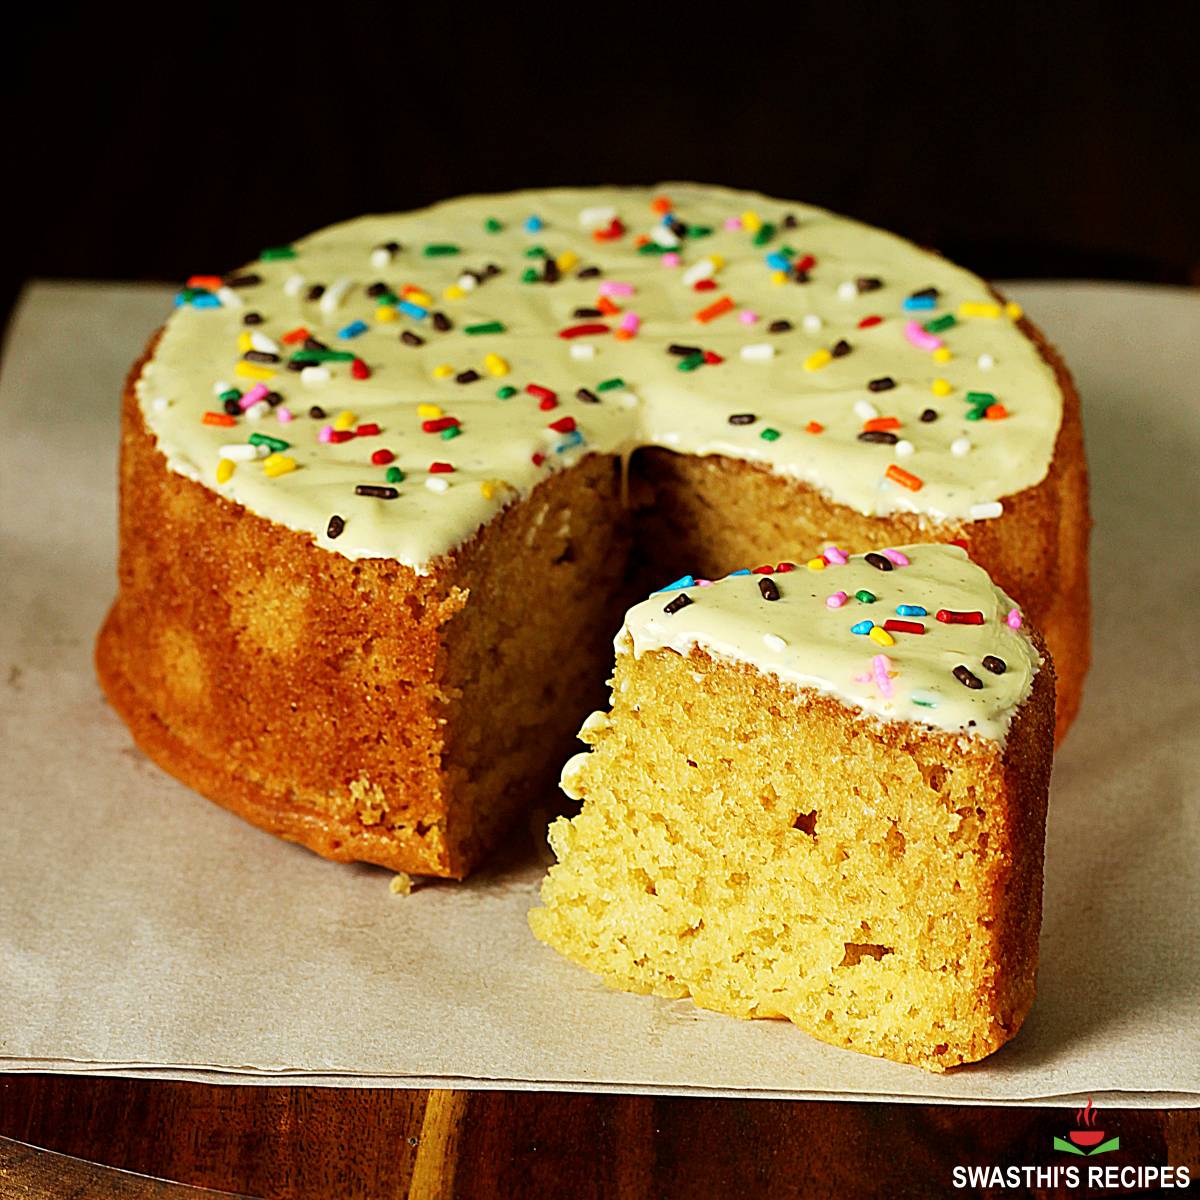 How to make delicious, fluffy, and attractive sponge cake